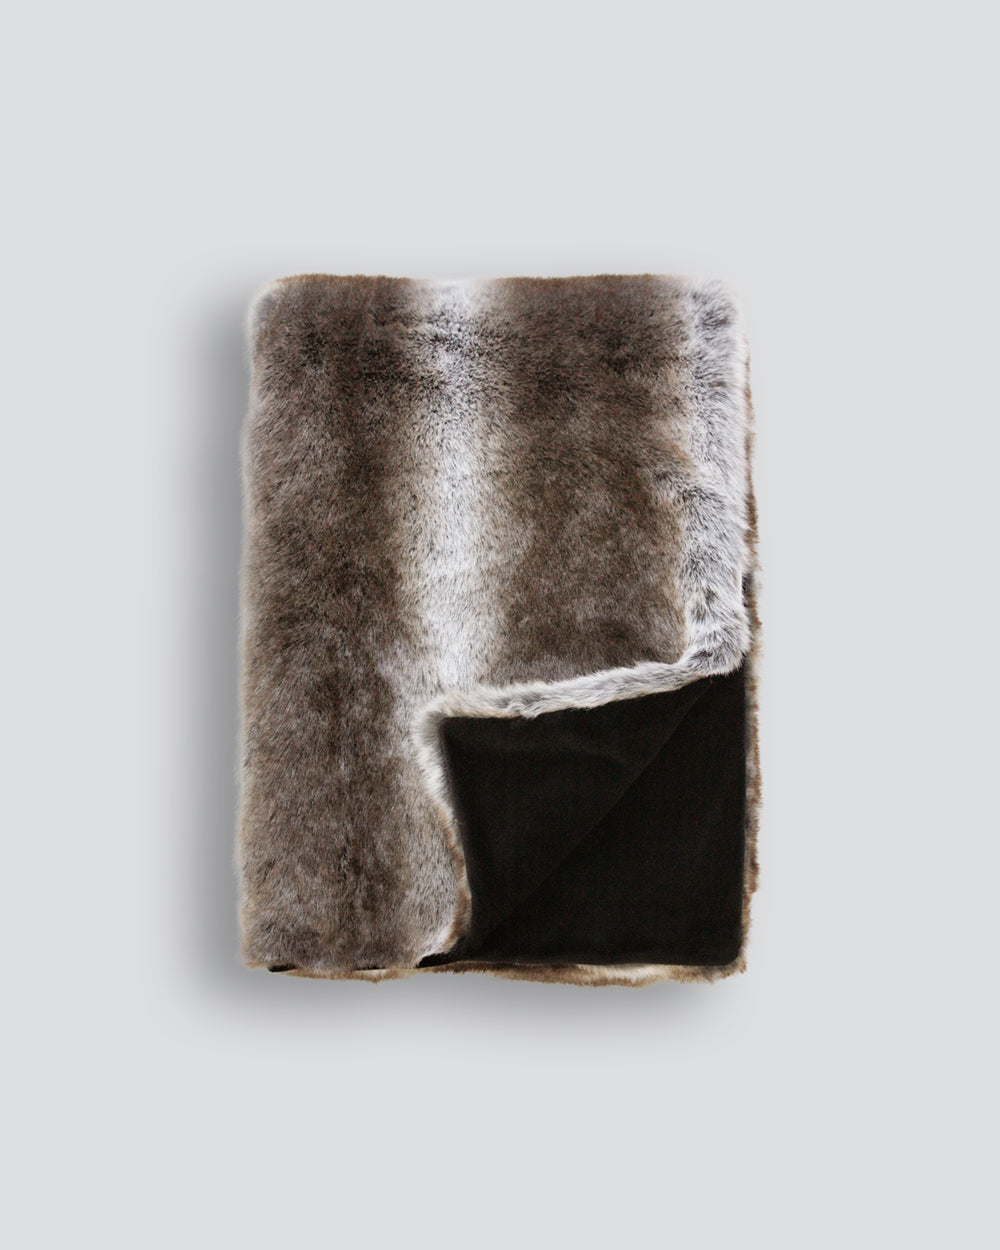 Heirloom Striped Elk Throw Rug Blanket in Faux Fur is available from Make Your House A Home Premium Stockist. Furniture Store Bendigo, Victoria. Australia Wide Delivery.